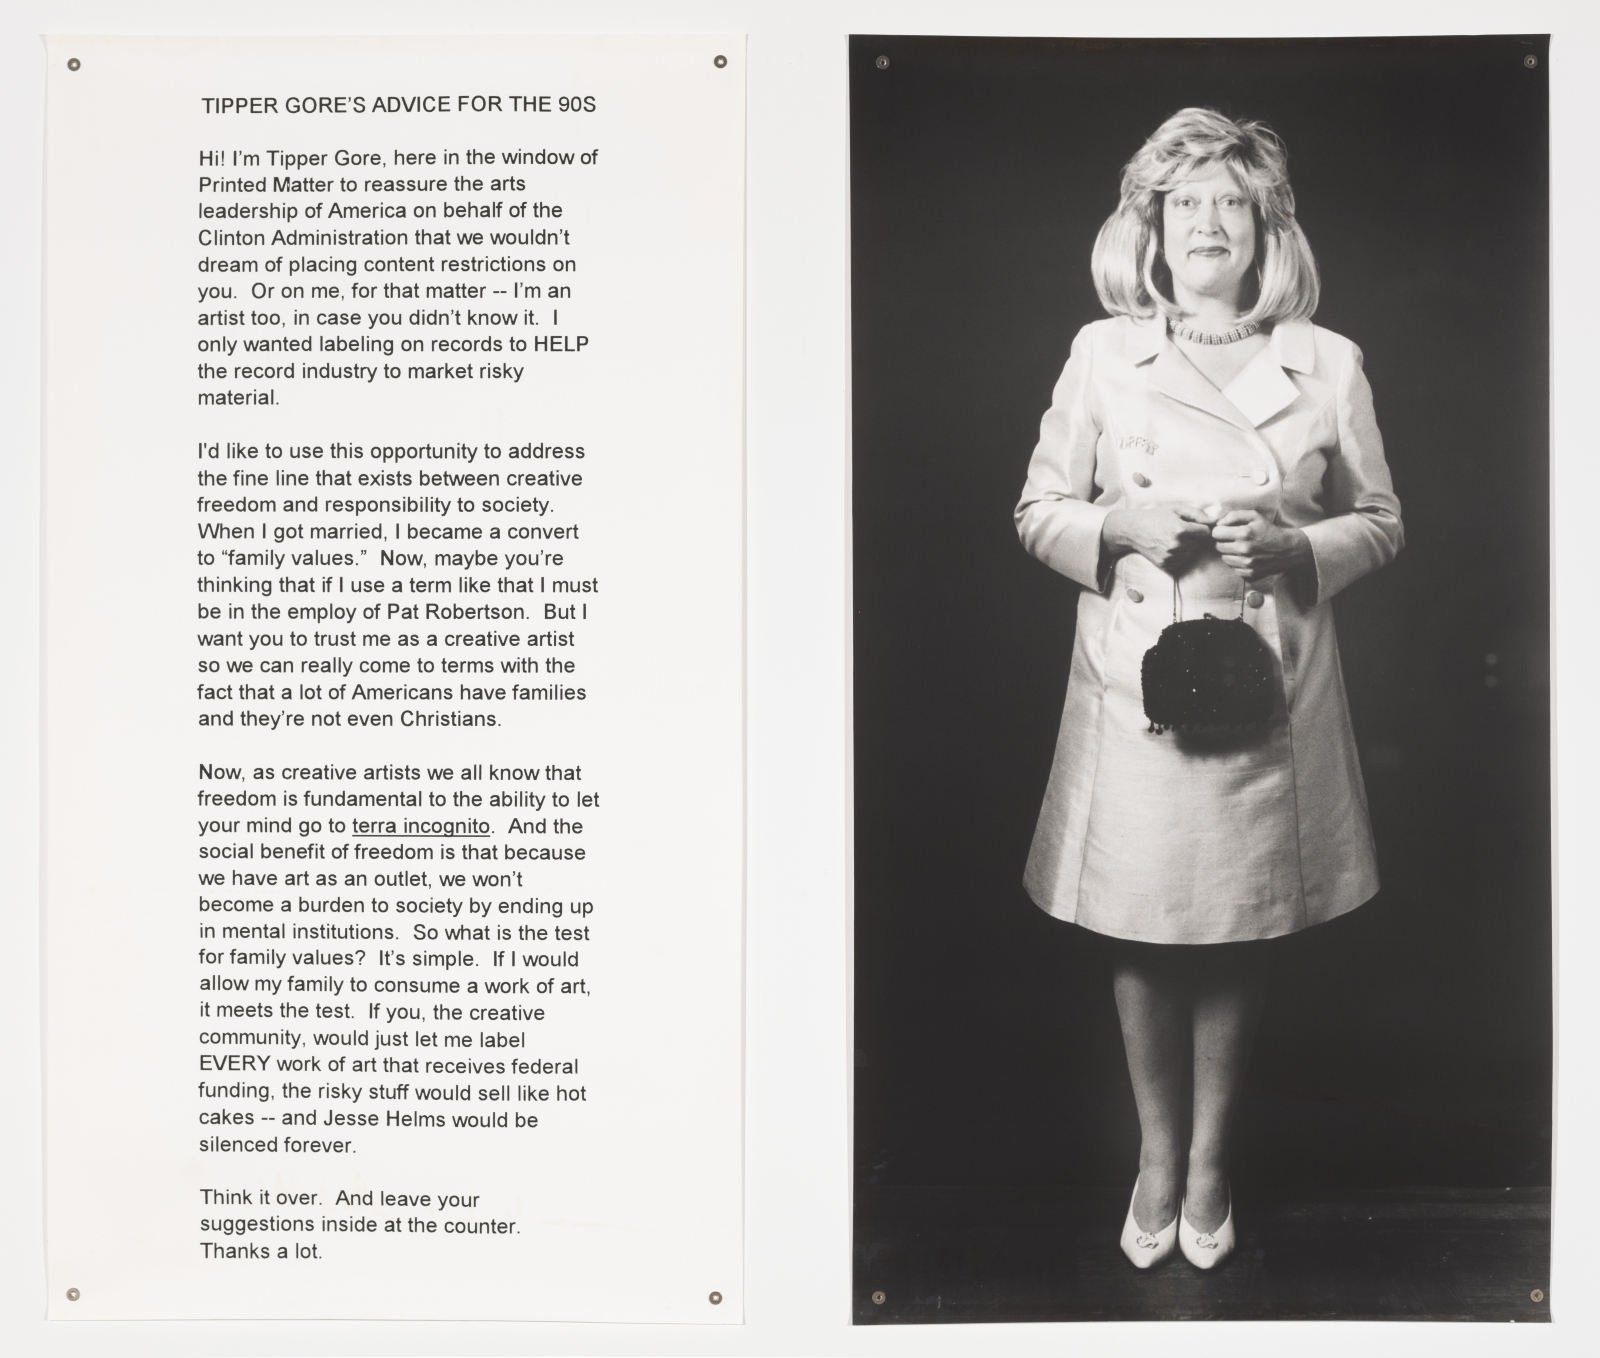 Martha Wilson
Tipper Gore&amp;#39;s Advice for the 90s, 1994
commercially printed black and white photostat text panel and photograph on paper
2 panels, each: 71 x 39 ins.
(180.3 x 99.1 cm)